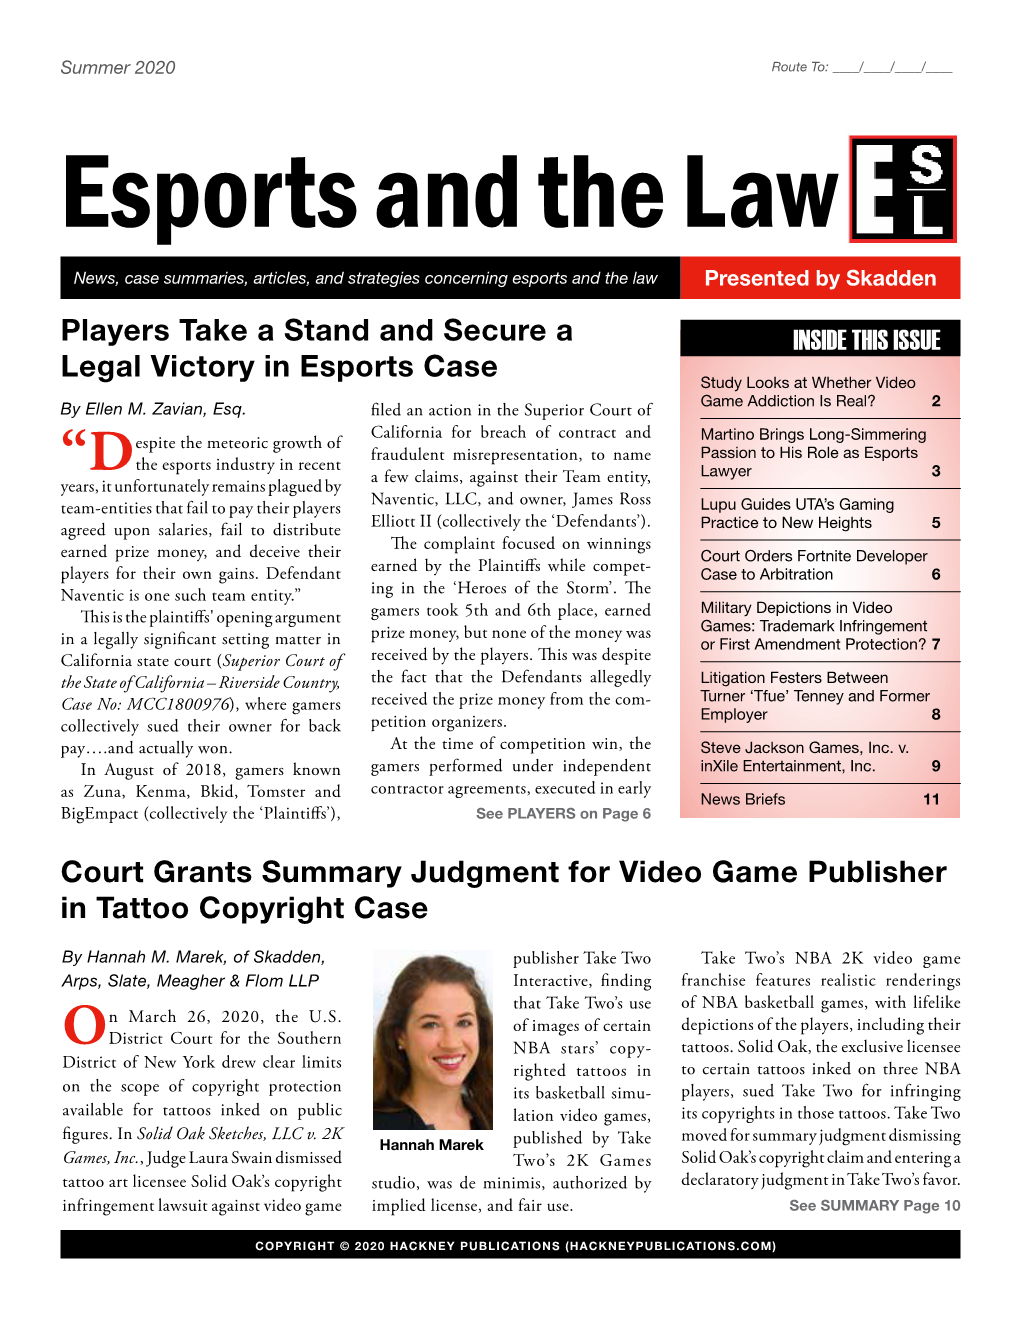 Esports and the Law News, Case Summaries, Articles, and Strategies Concerning Esports and the Law Presented by Skadden